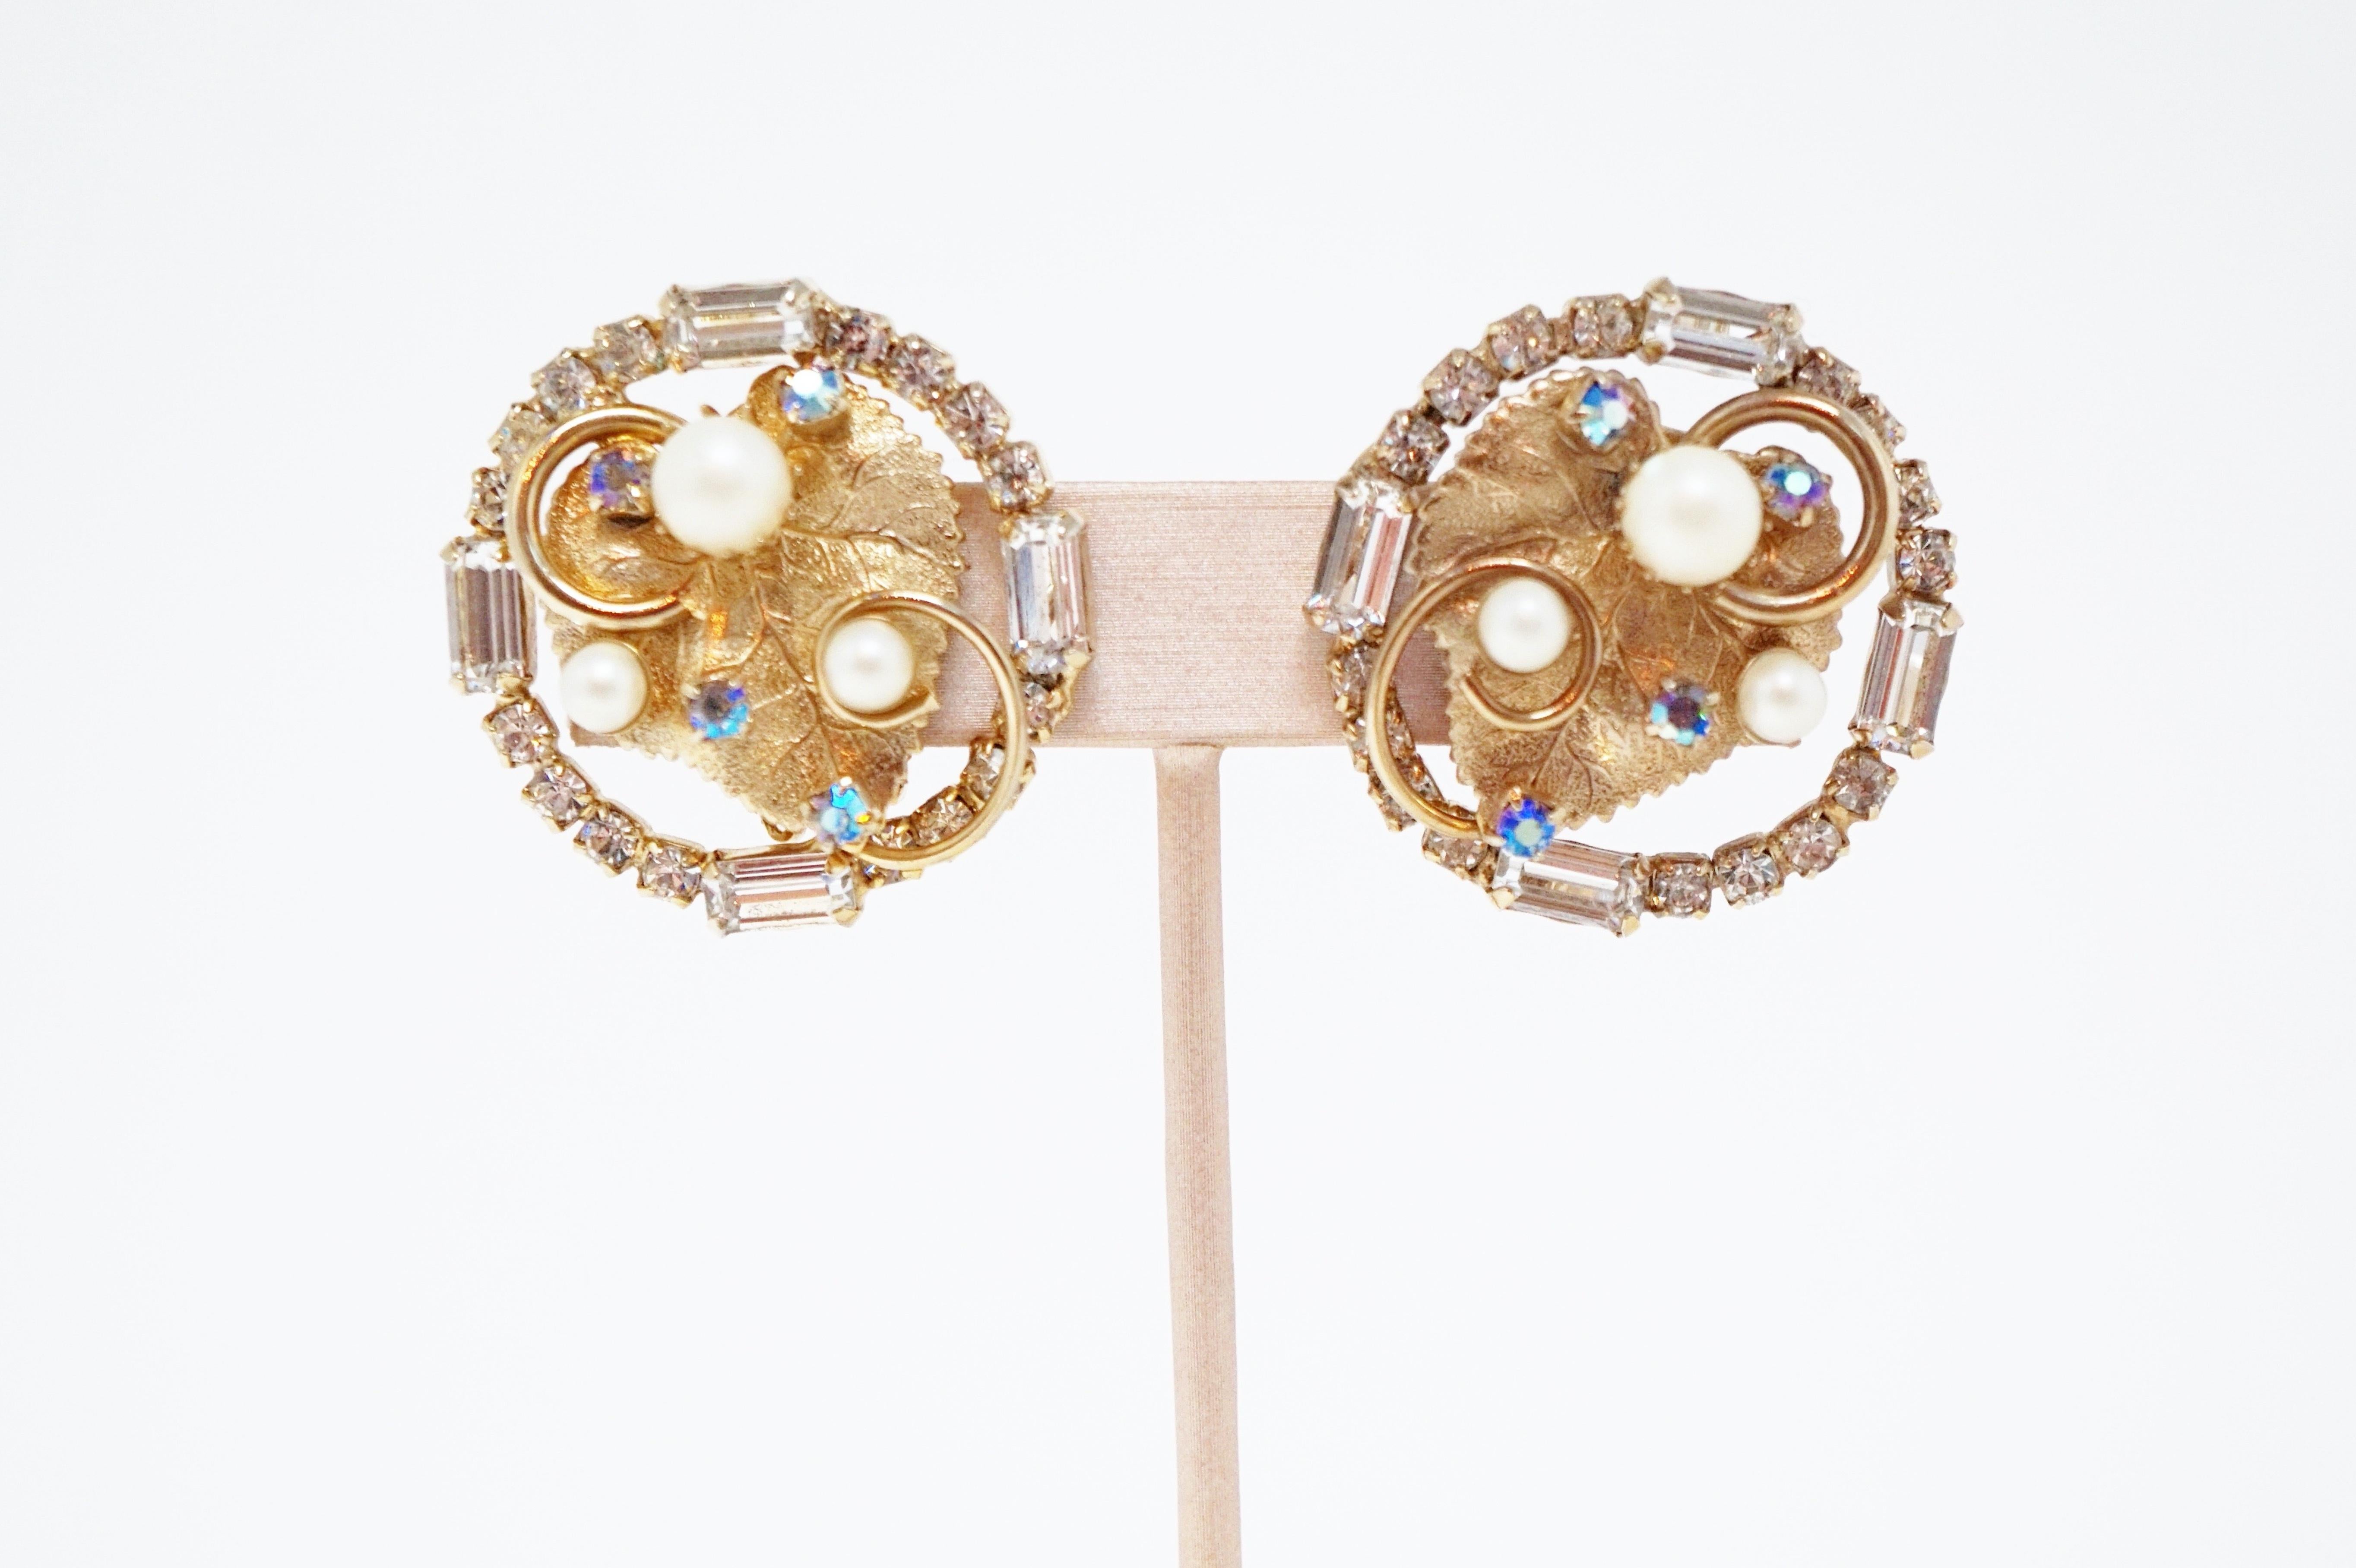 Gilded Leaf Rhinestone Earrings by Hobé, Signed circa 1950s For Sale 2